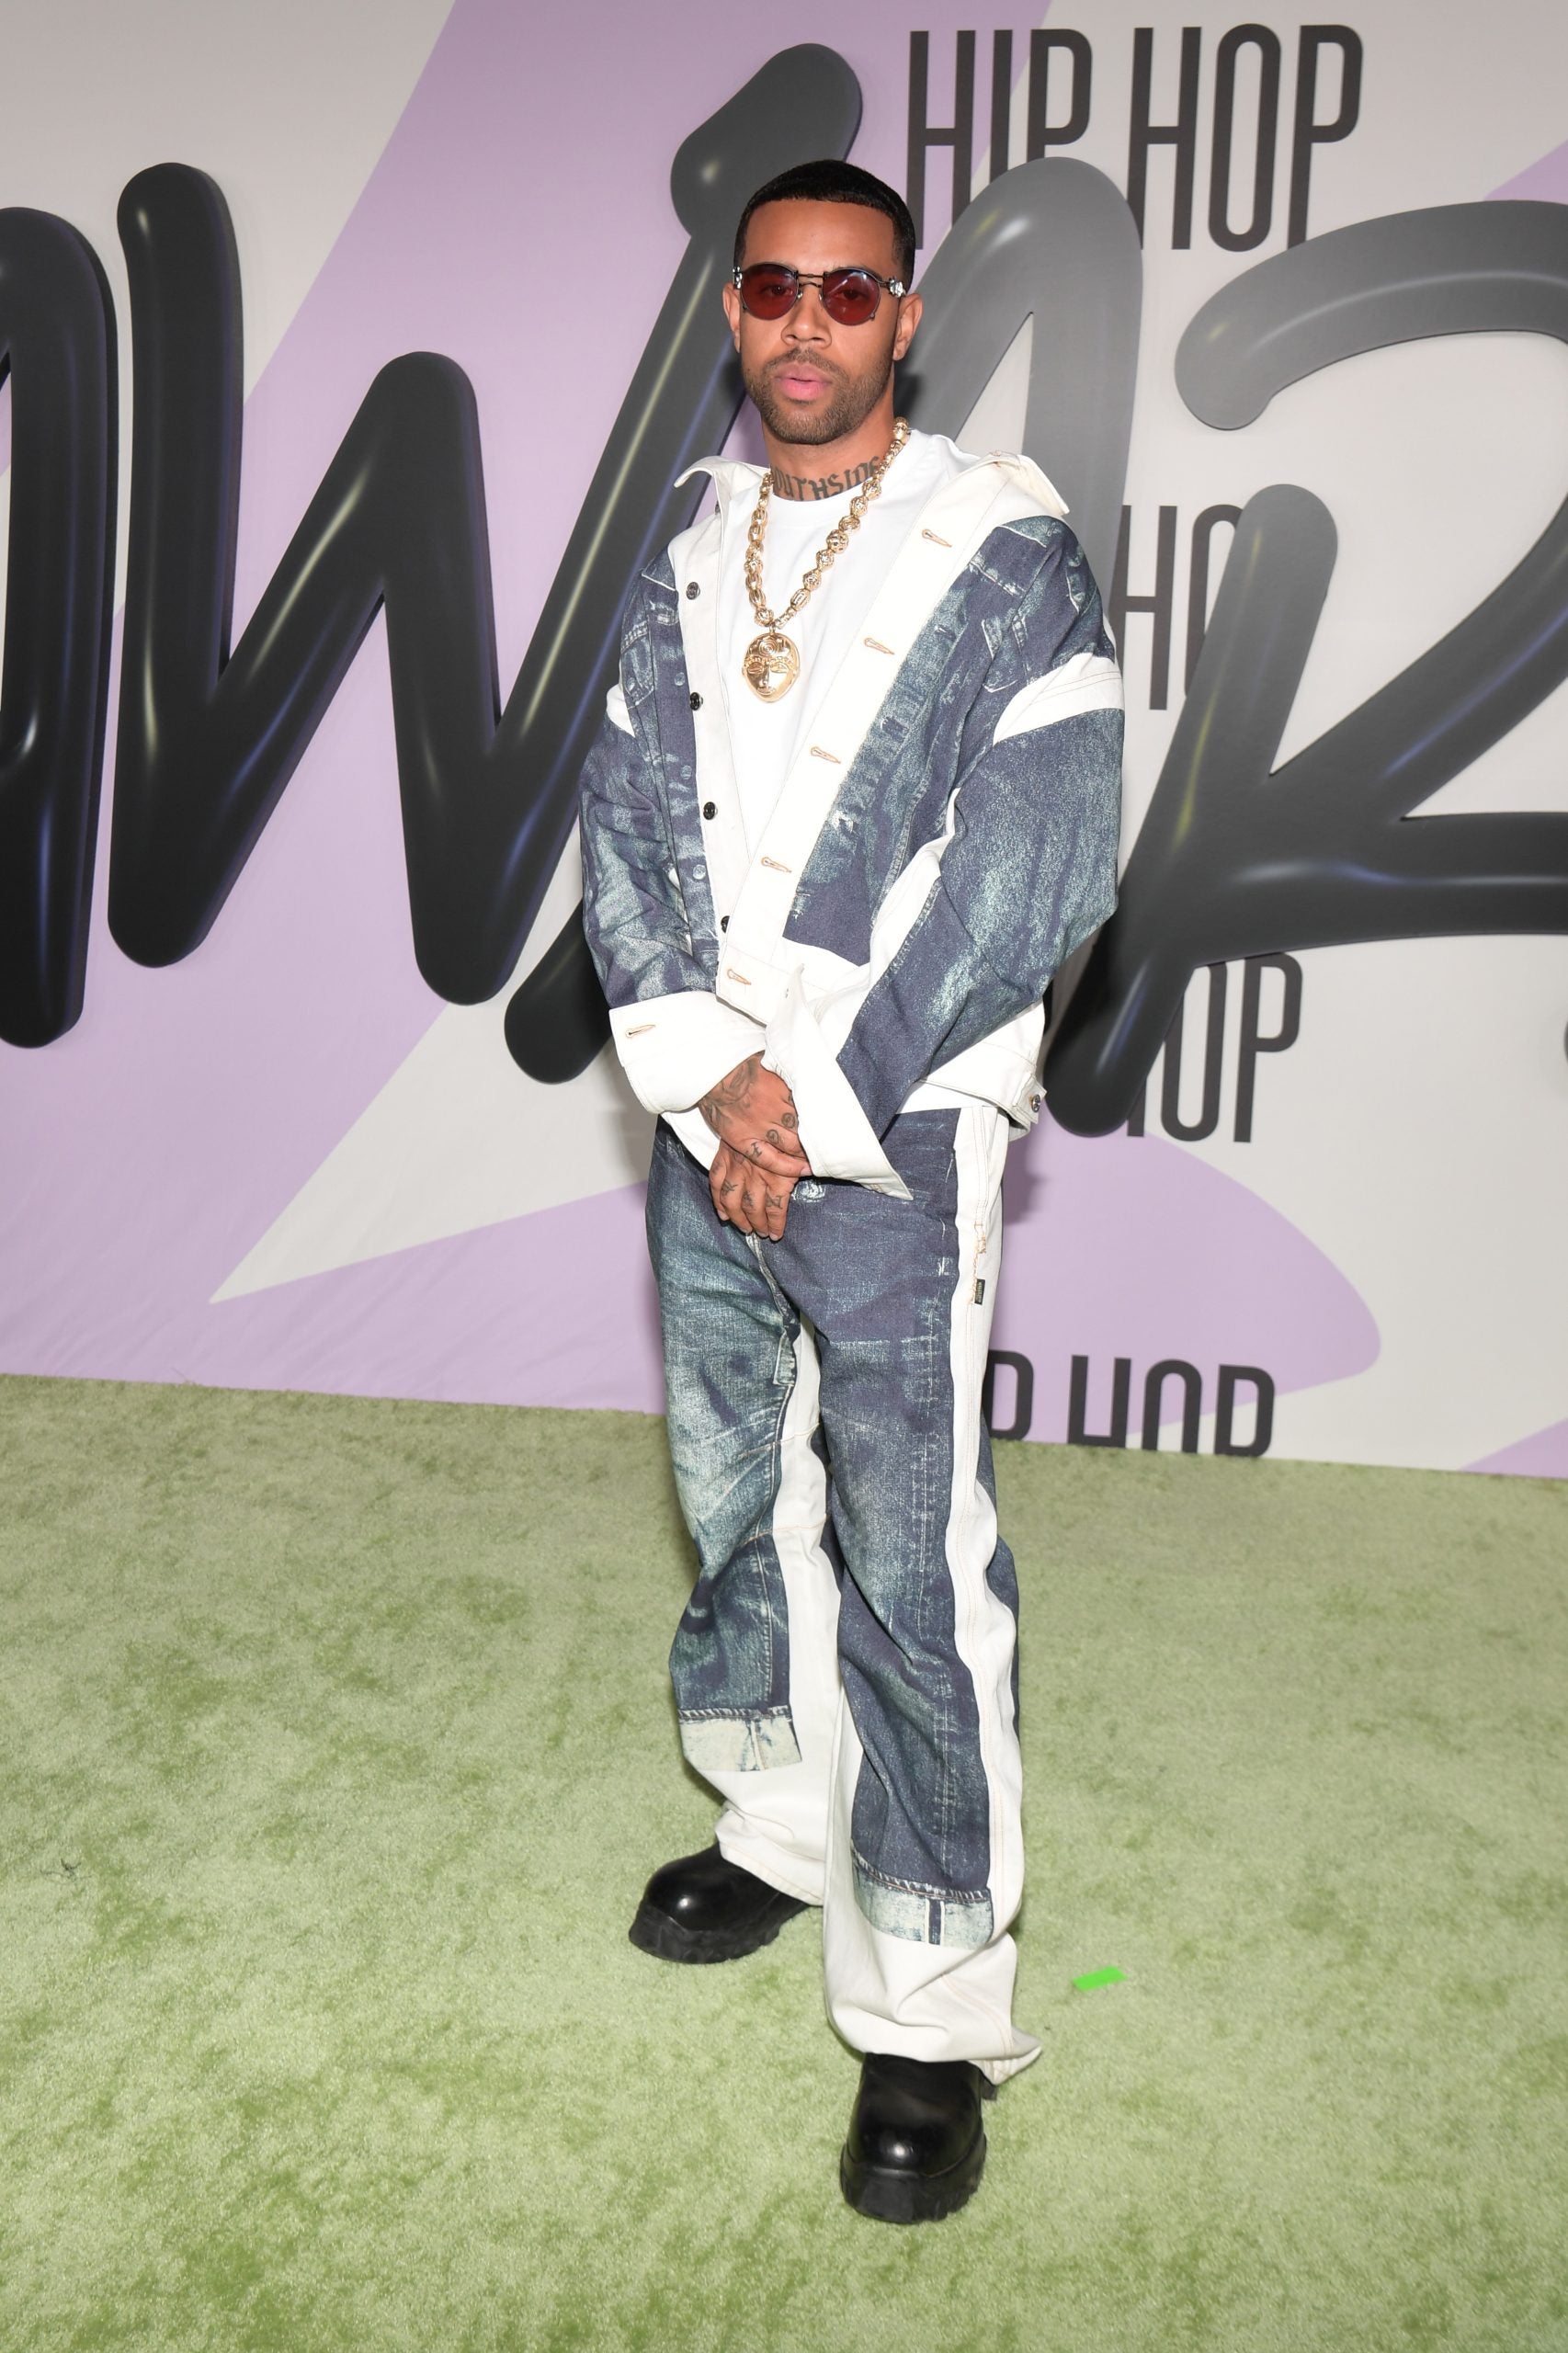 The Best Red Carpet Looks At The 2023 BET Hip Hop Awards: Coi Leray, Flo Milli & More